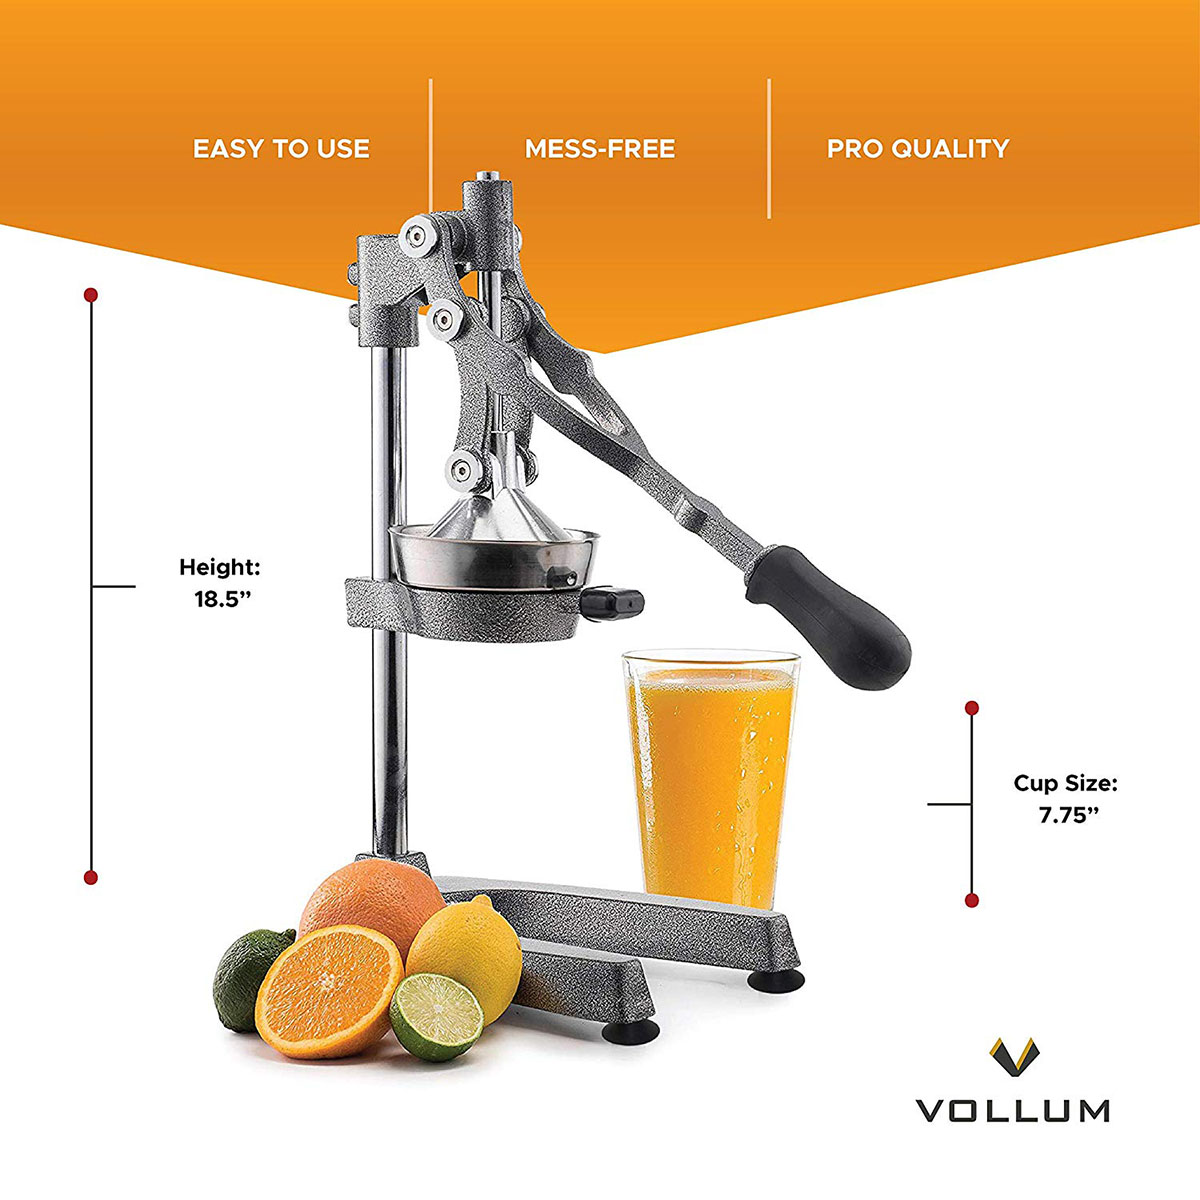 Vollum Manual Stainless Steel Extra Large Fruit Juicer image 1